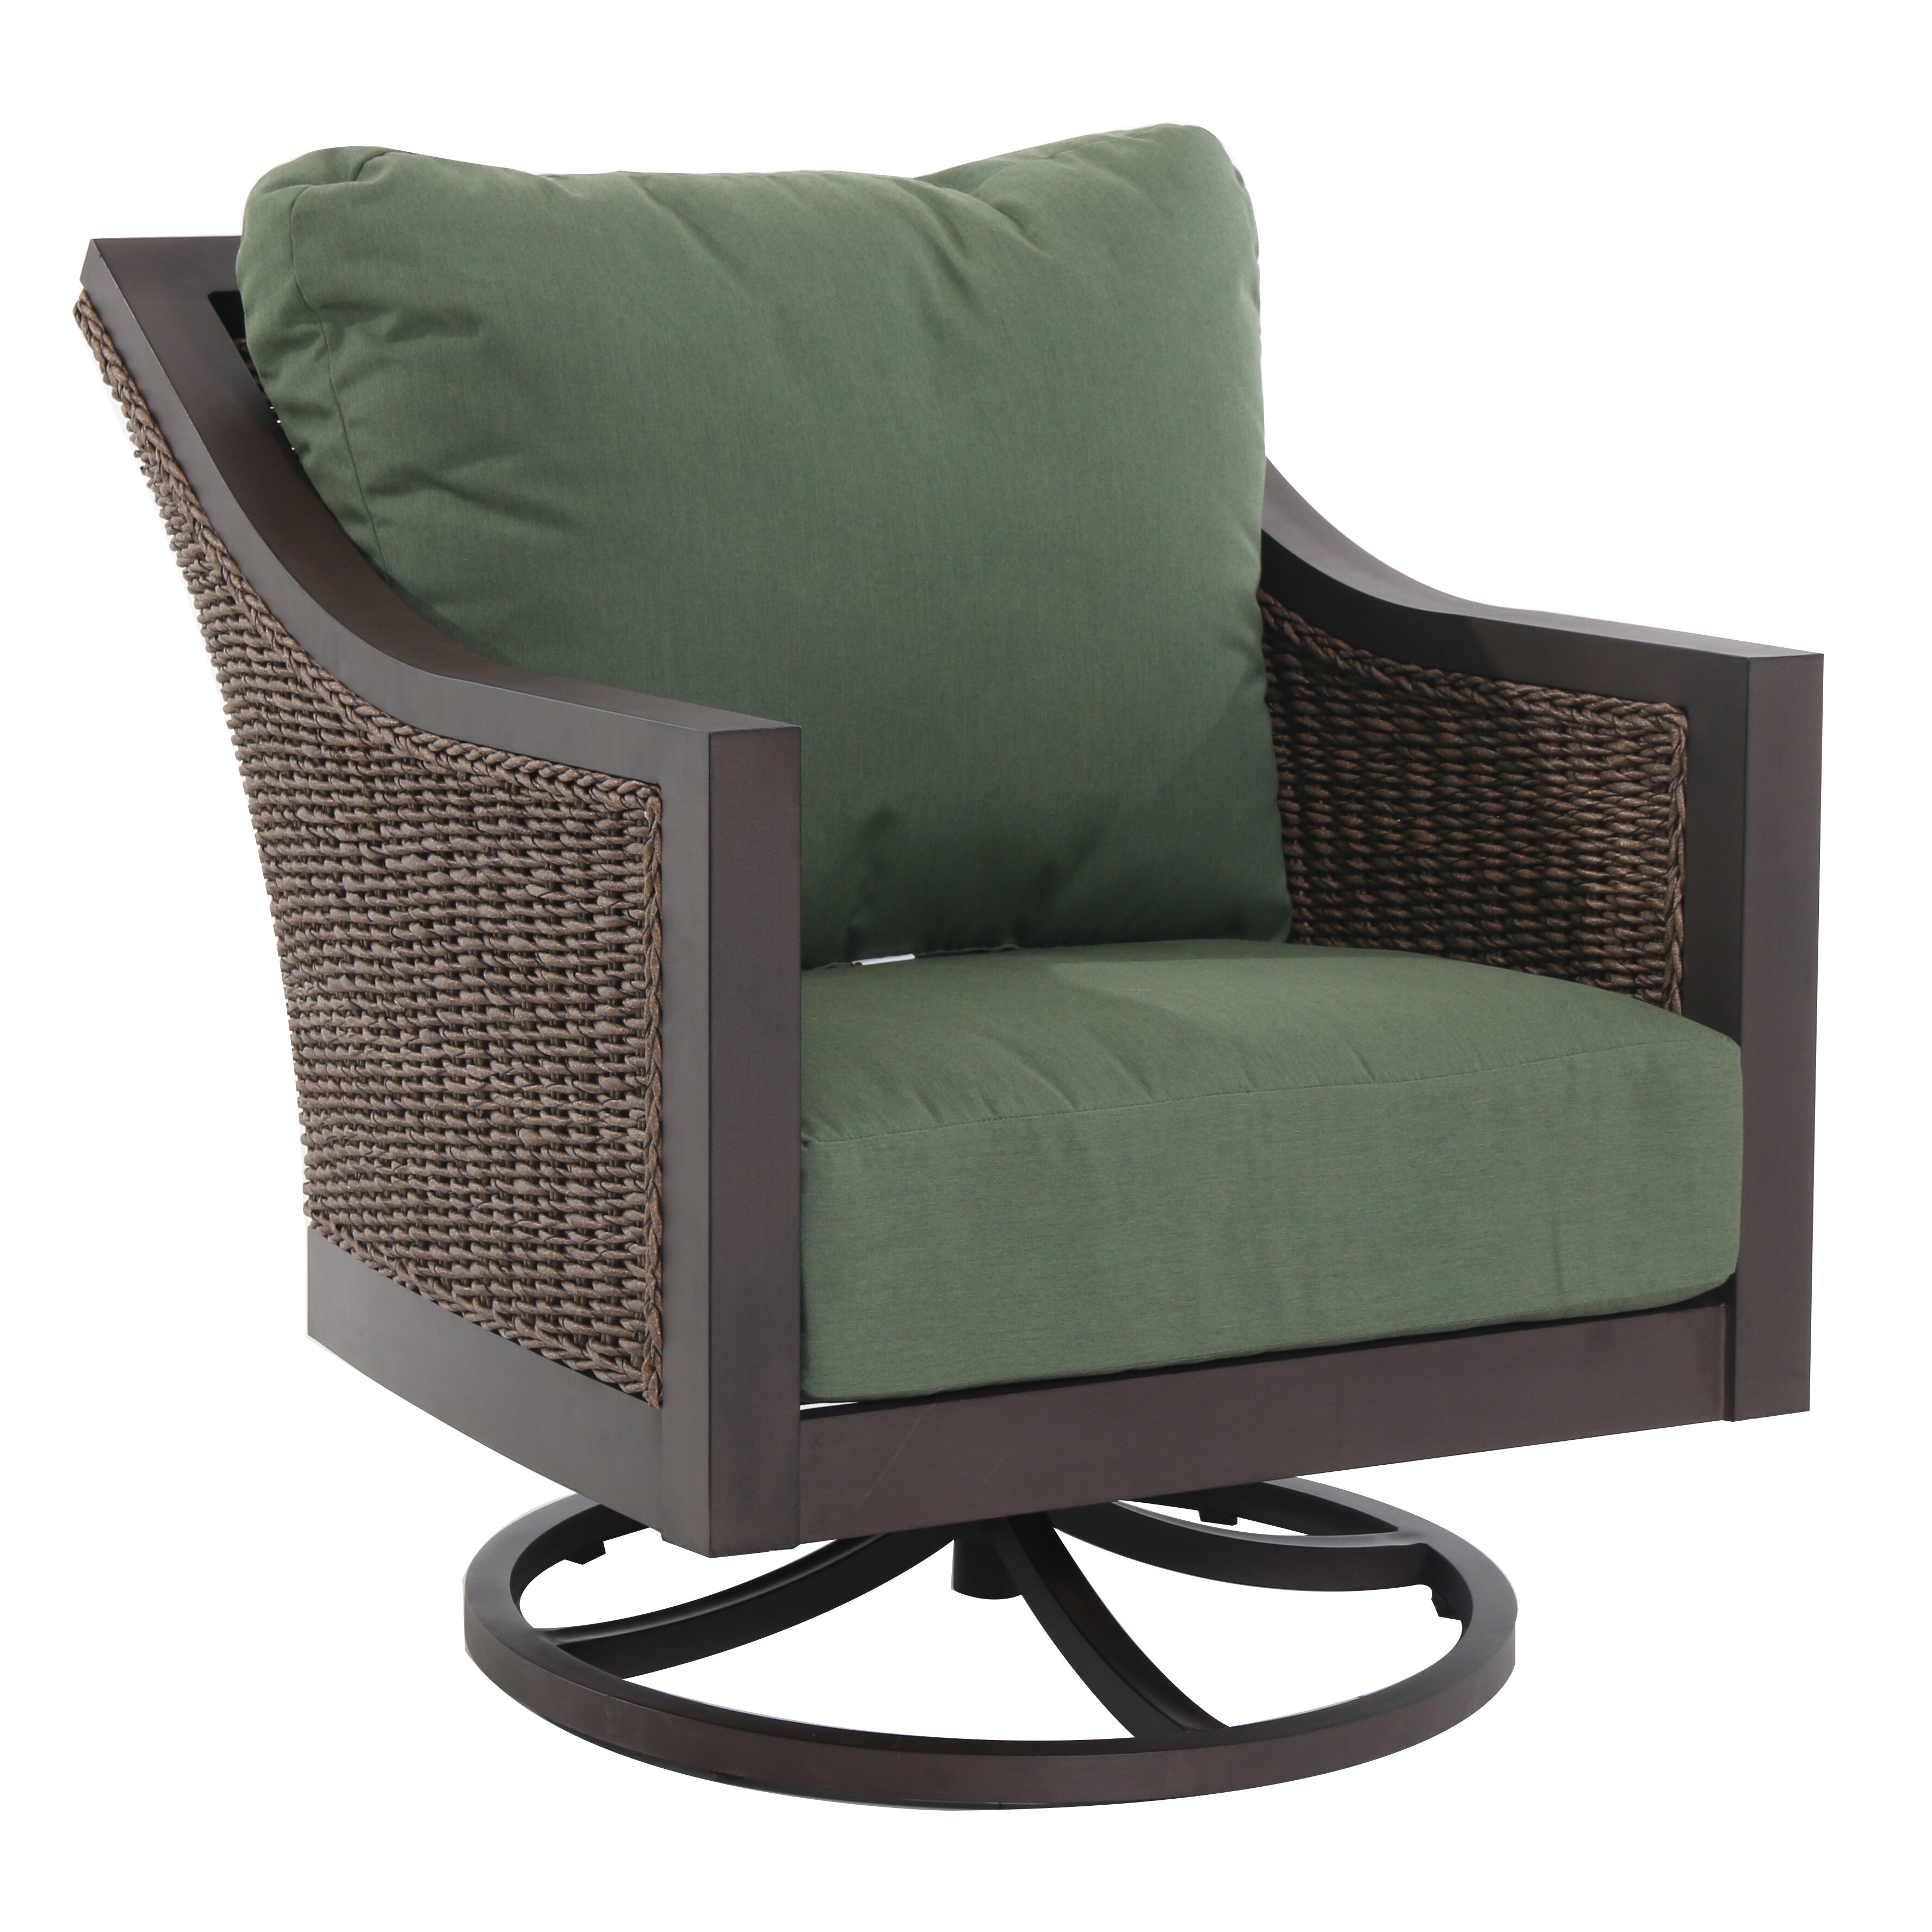 Royal Garden Biscay Swivel Lounge Rocking Chair with